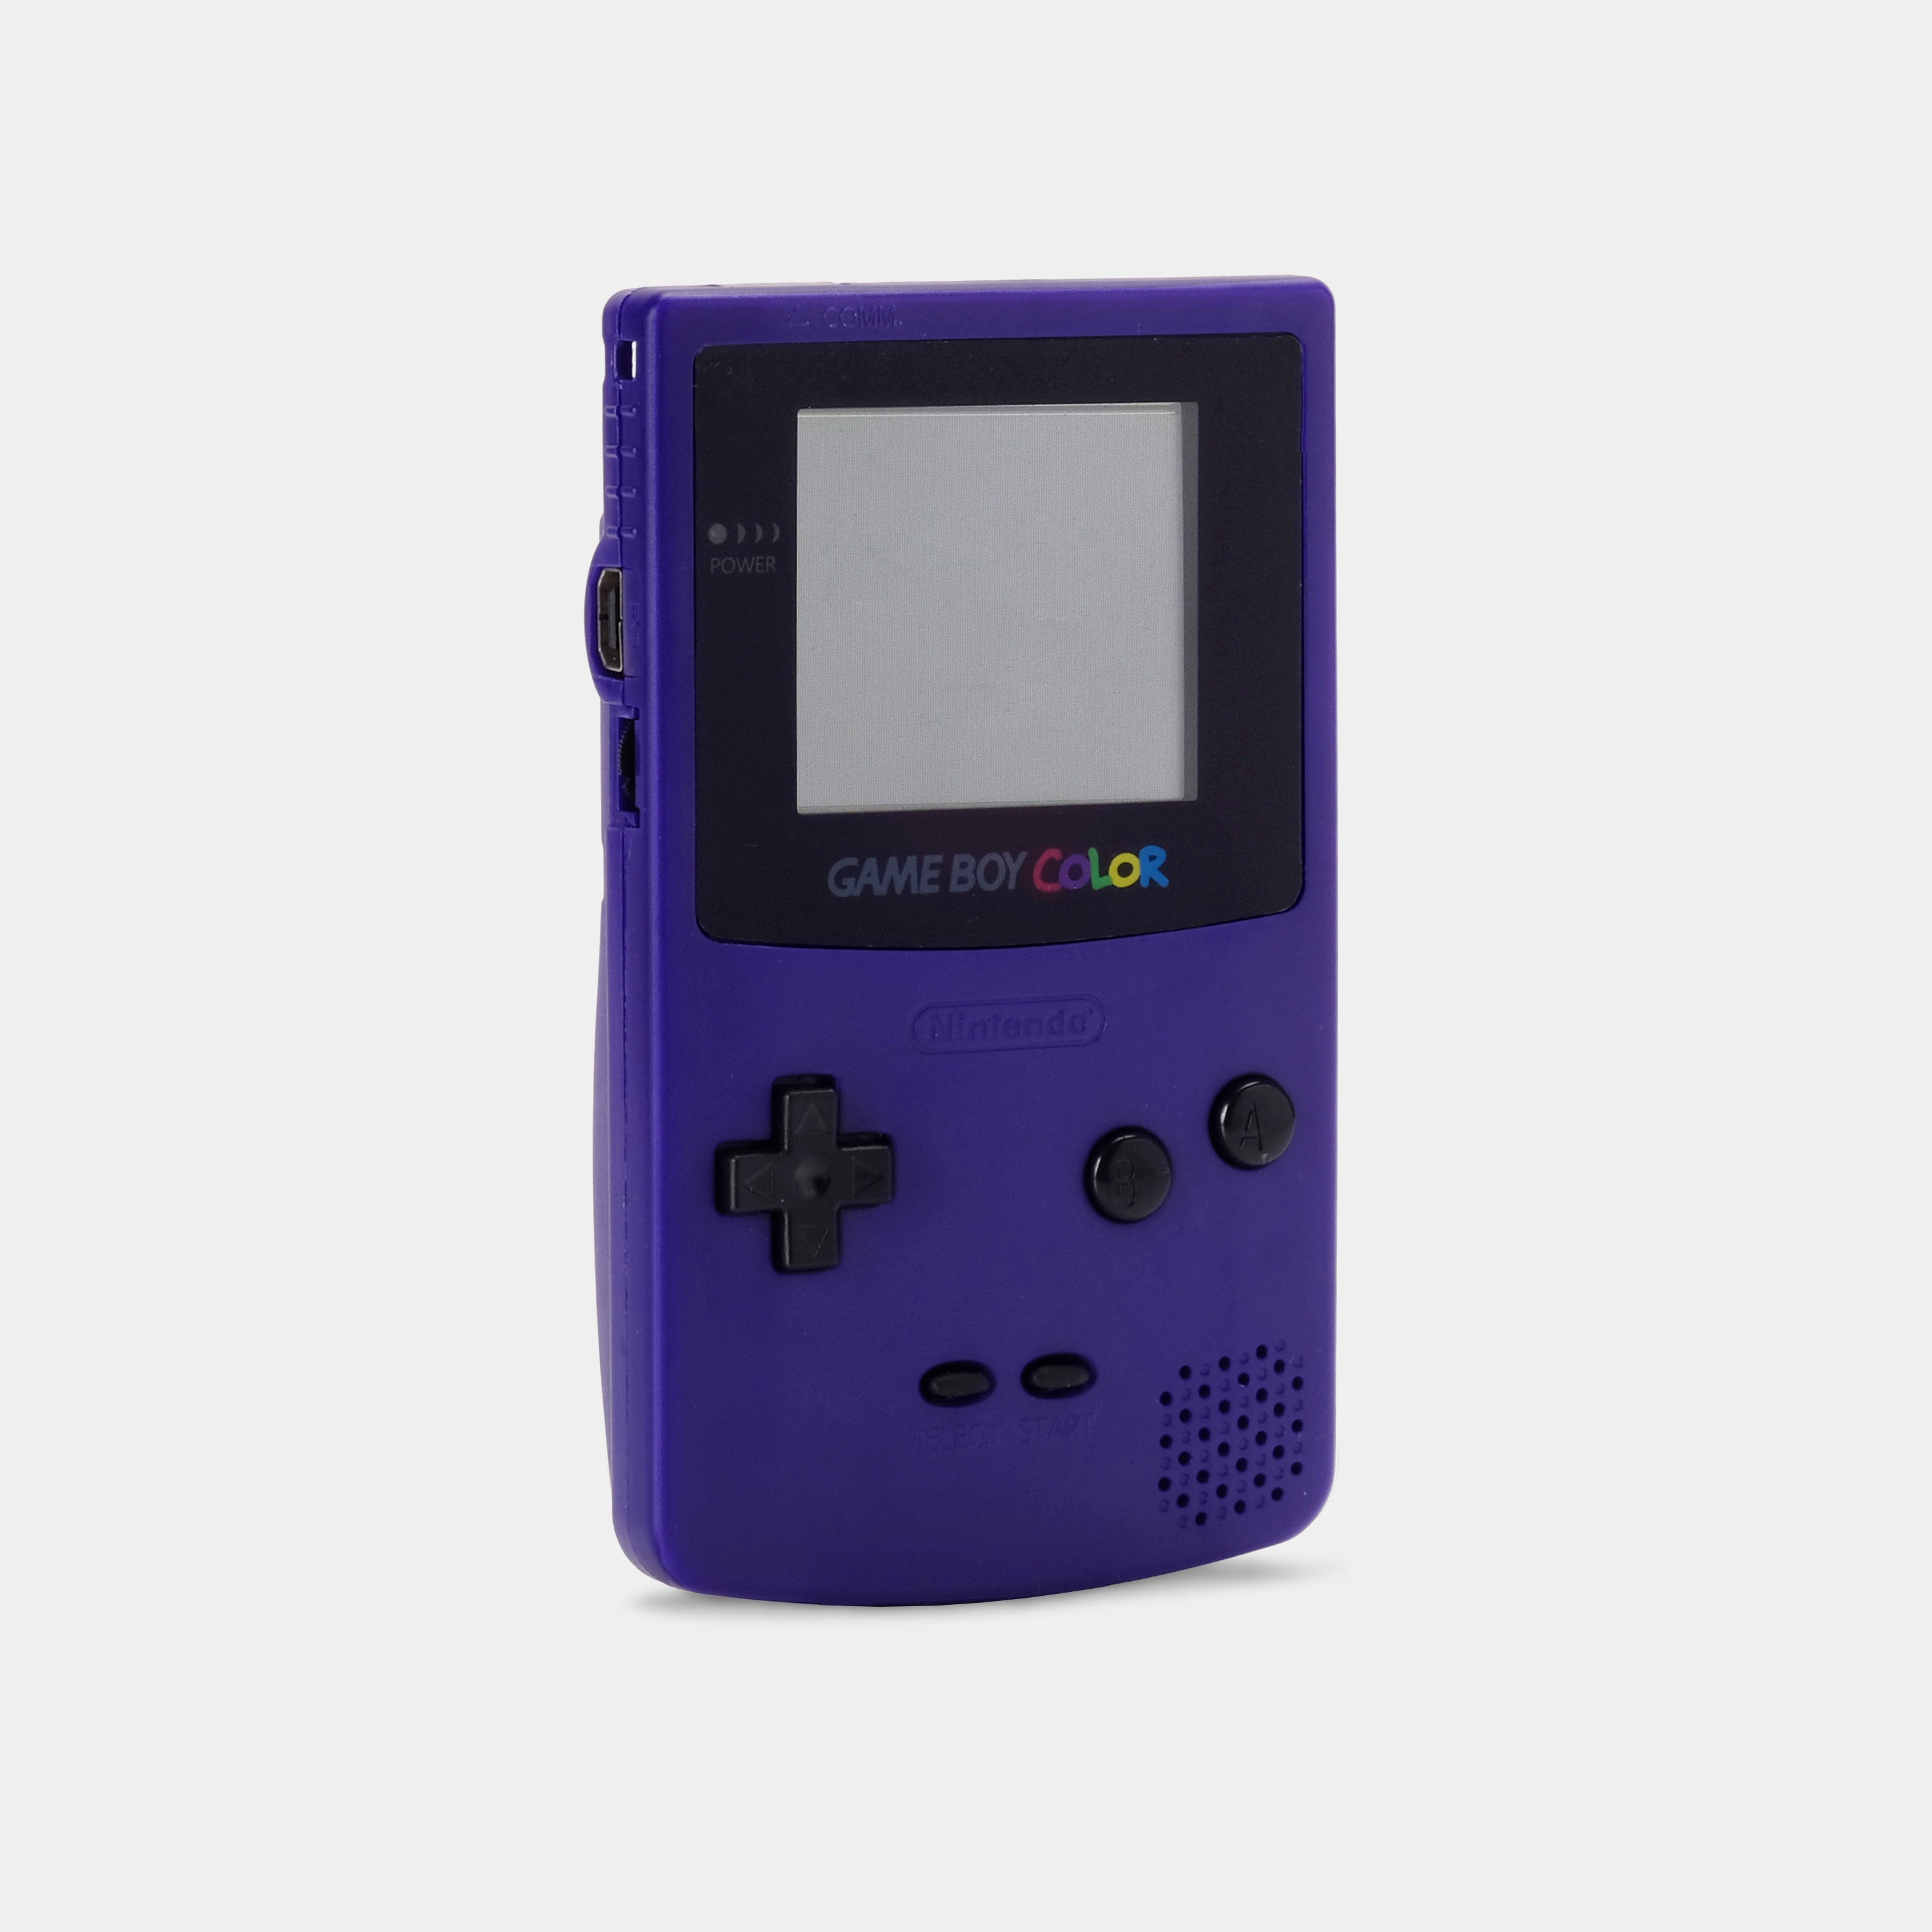 MiscRave and the Game Boy Color » MiscRave